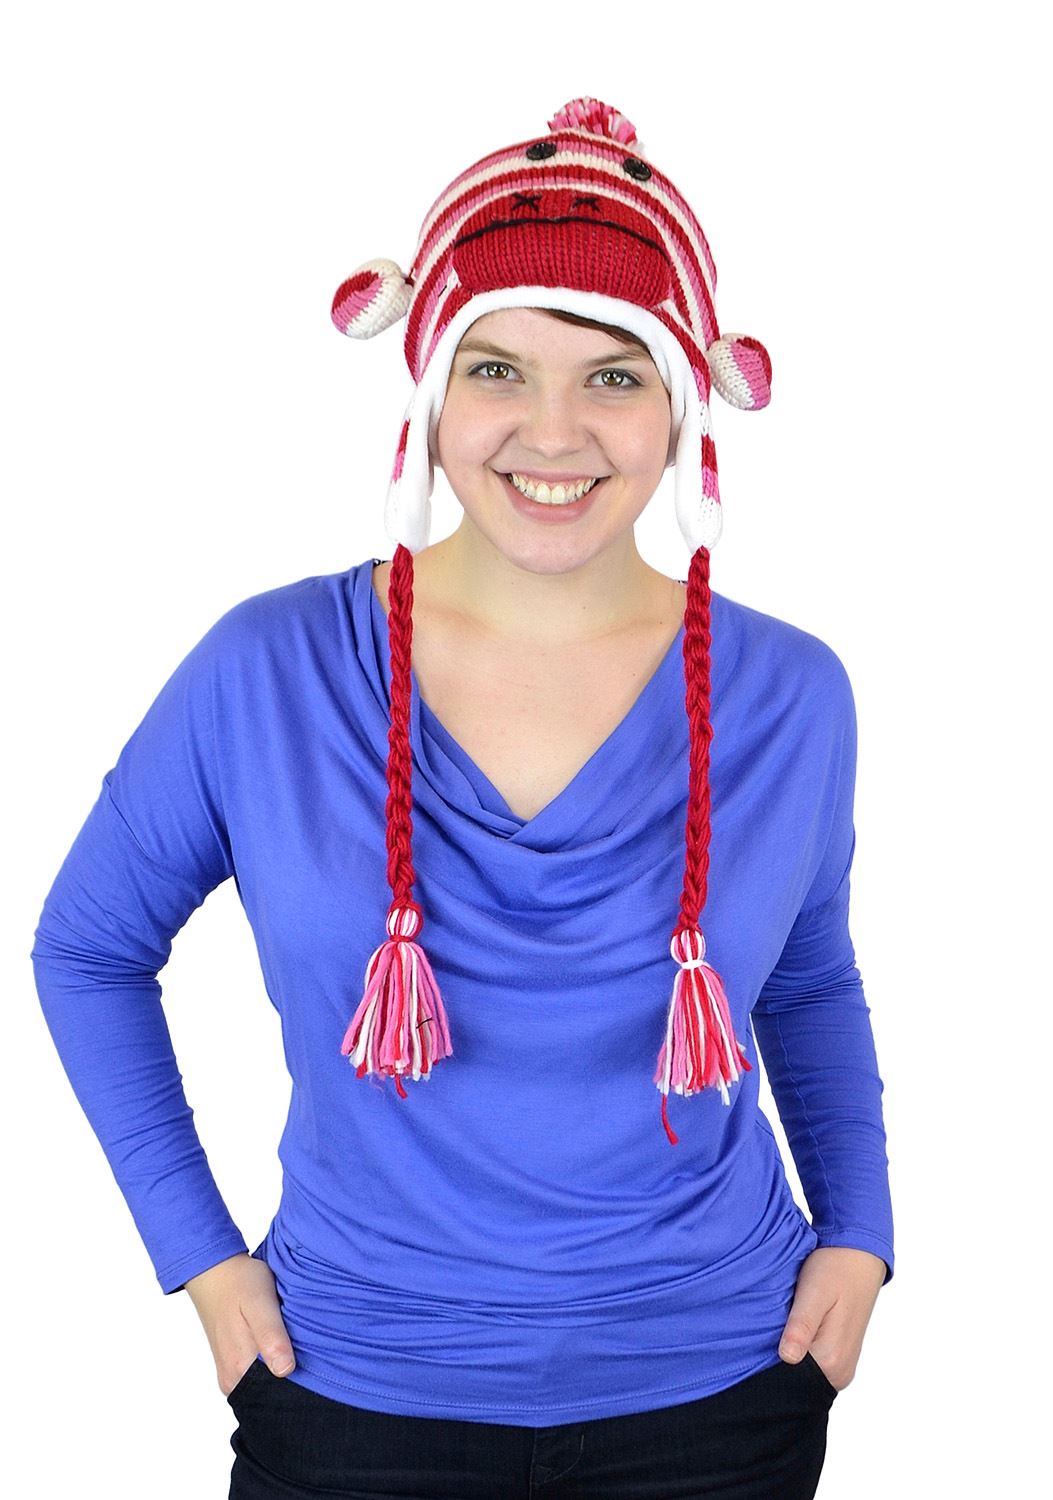 Animal Hats With Mitten For Adults / Kids Cute Winter Hats Beanie Substitute - Pink Monkey Hat